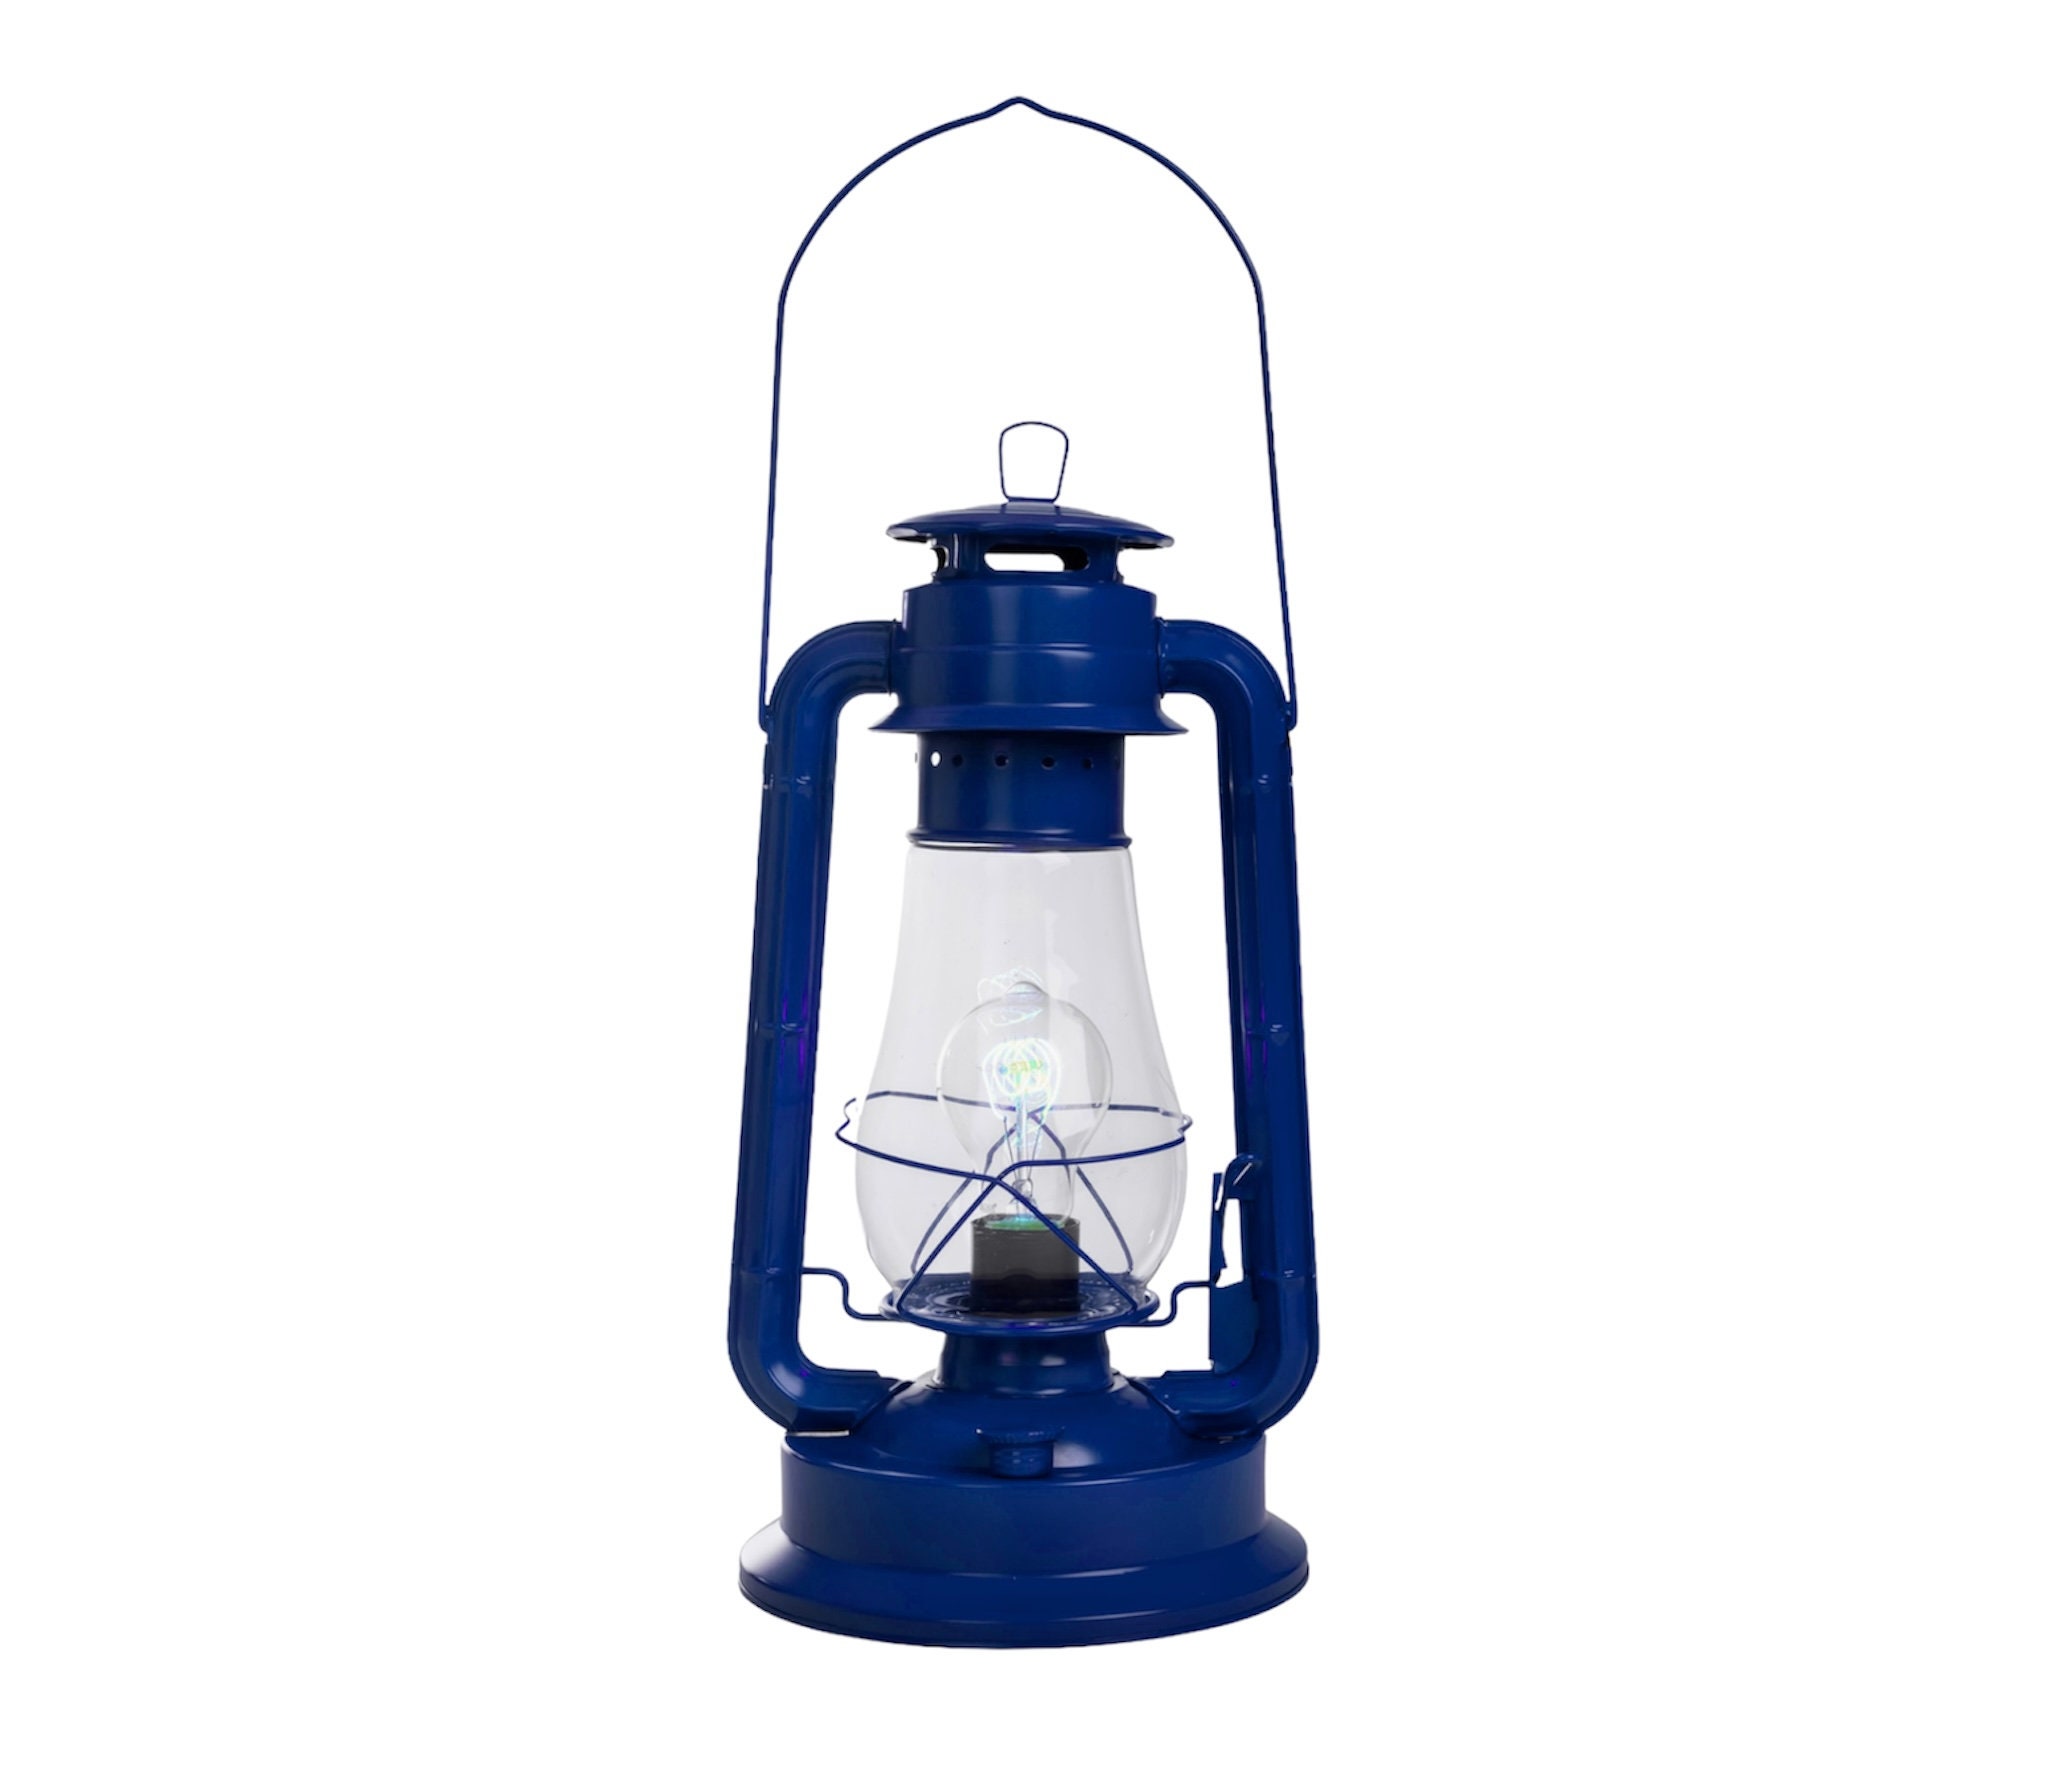 Dimmable Electric Lantern Table Lamp with line Cord dimmer and